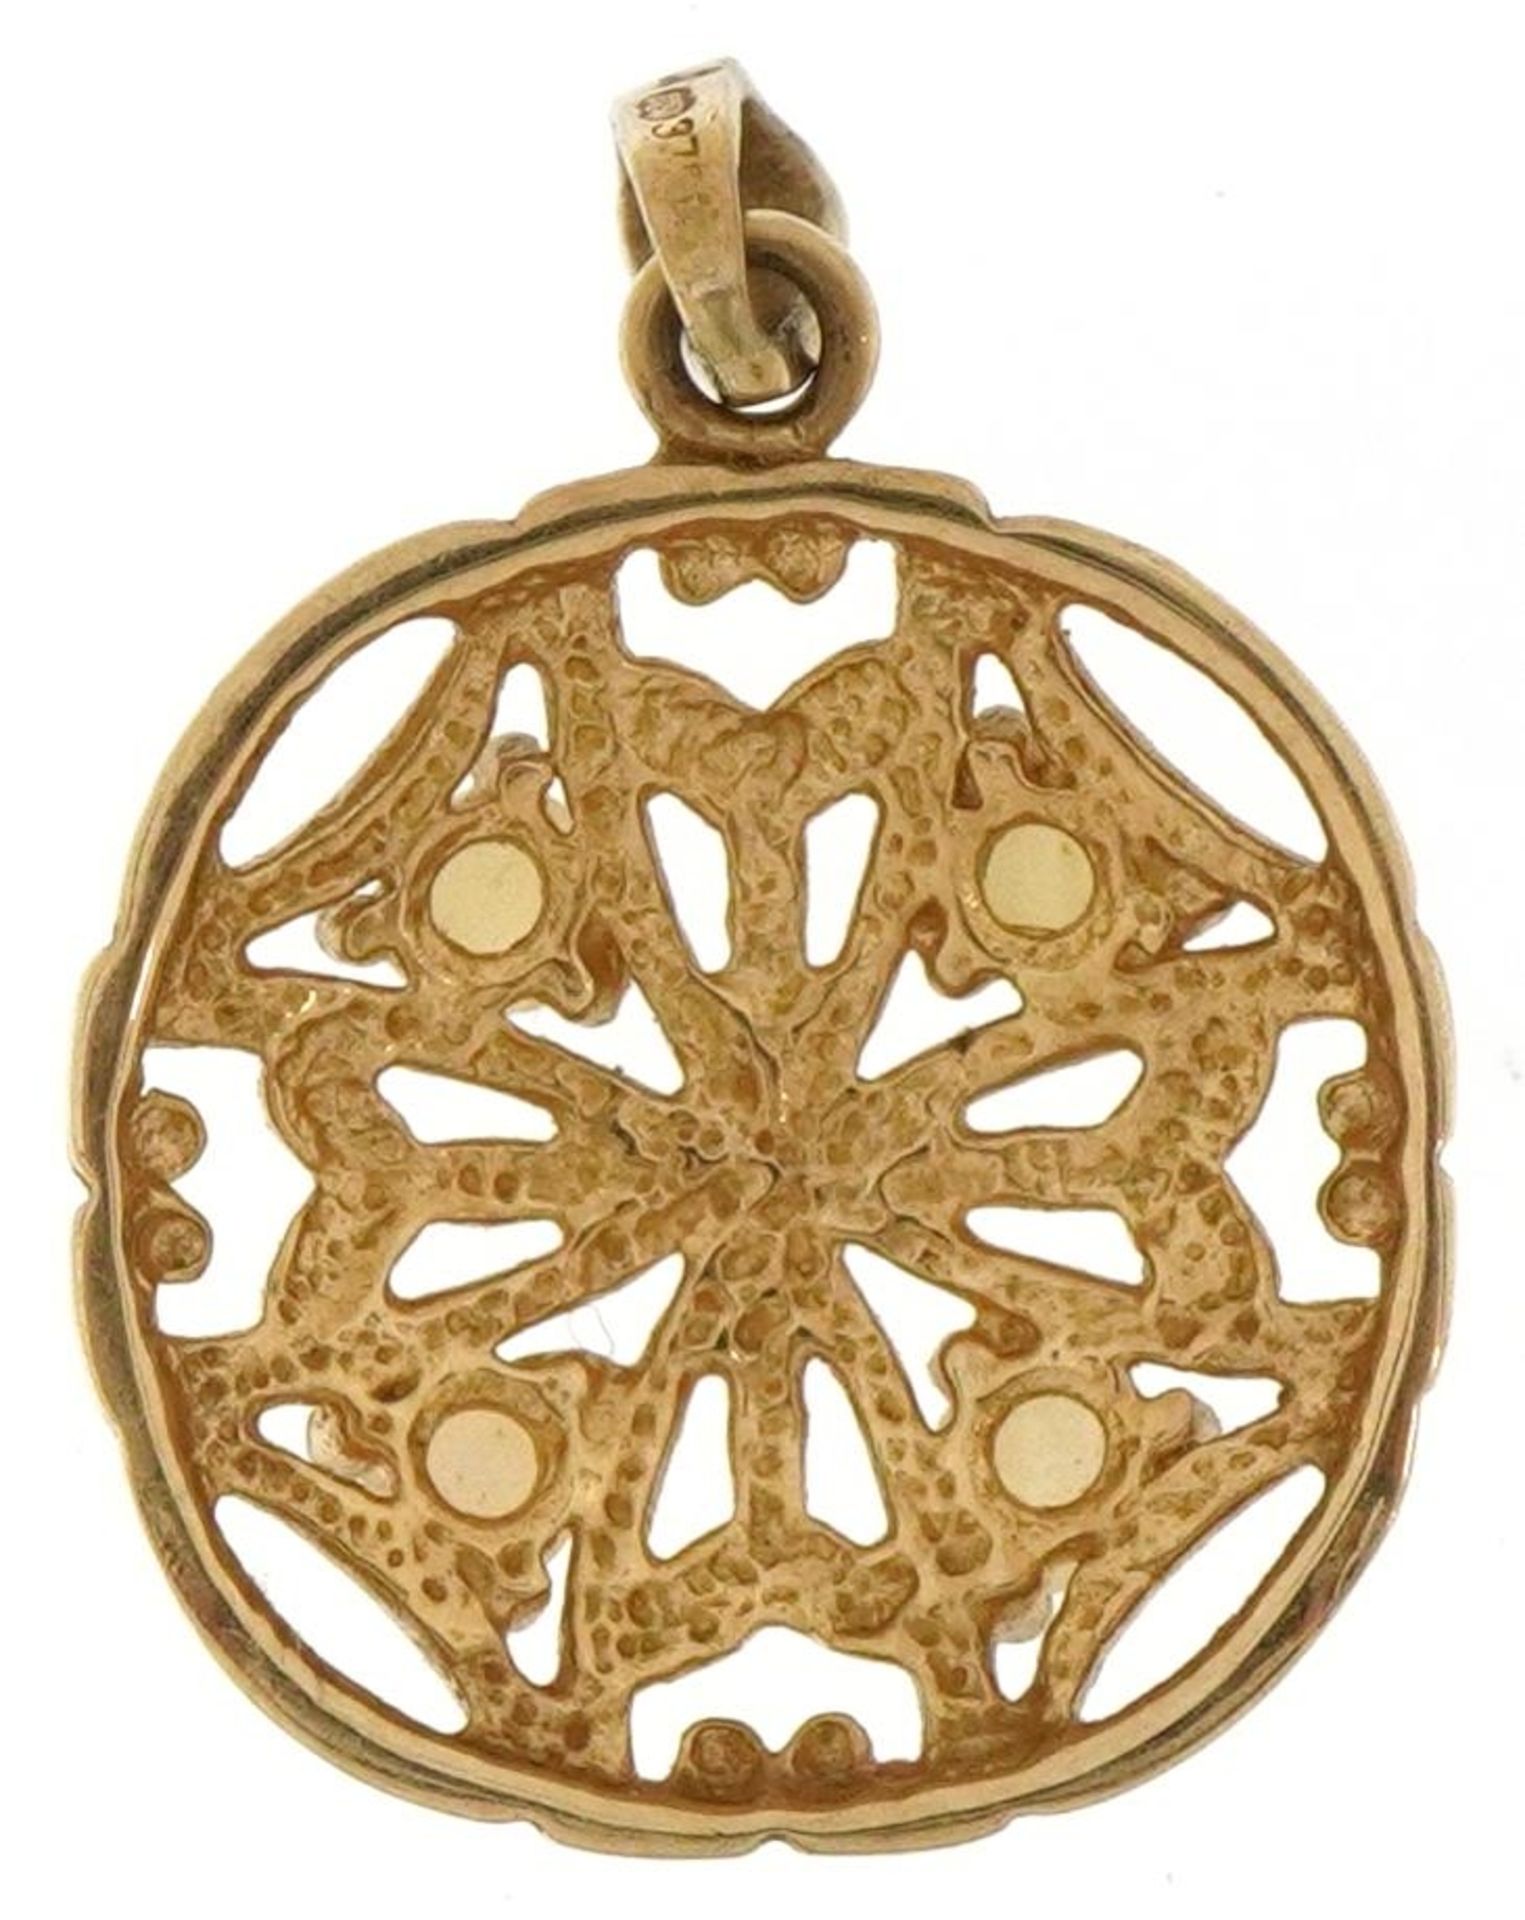 9ct gold seed pearl openwork pendant, 1.8cm high, 1.6g - Image 2 of 2